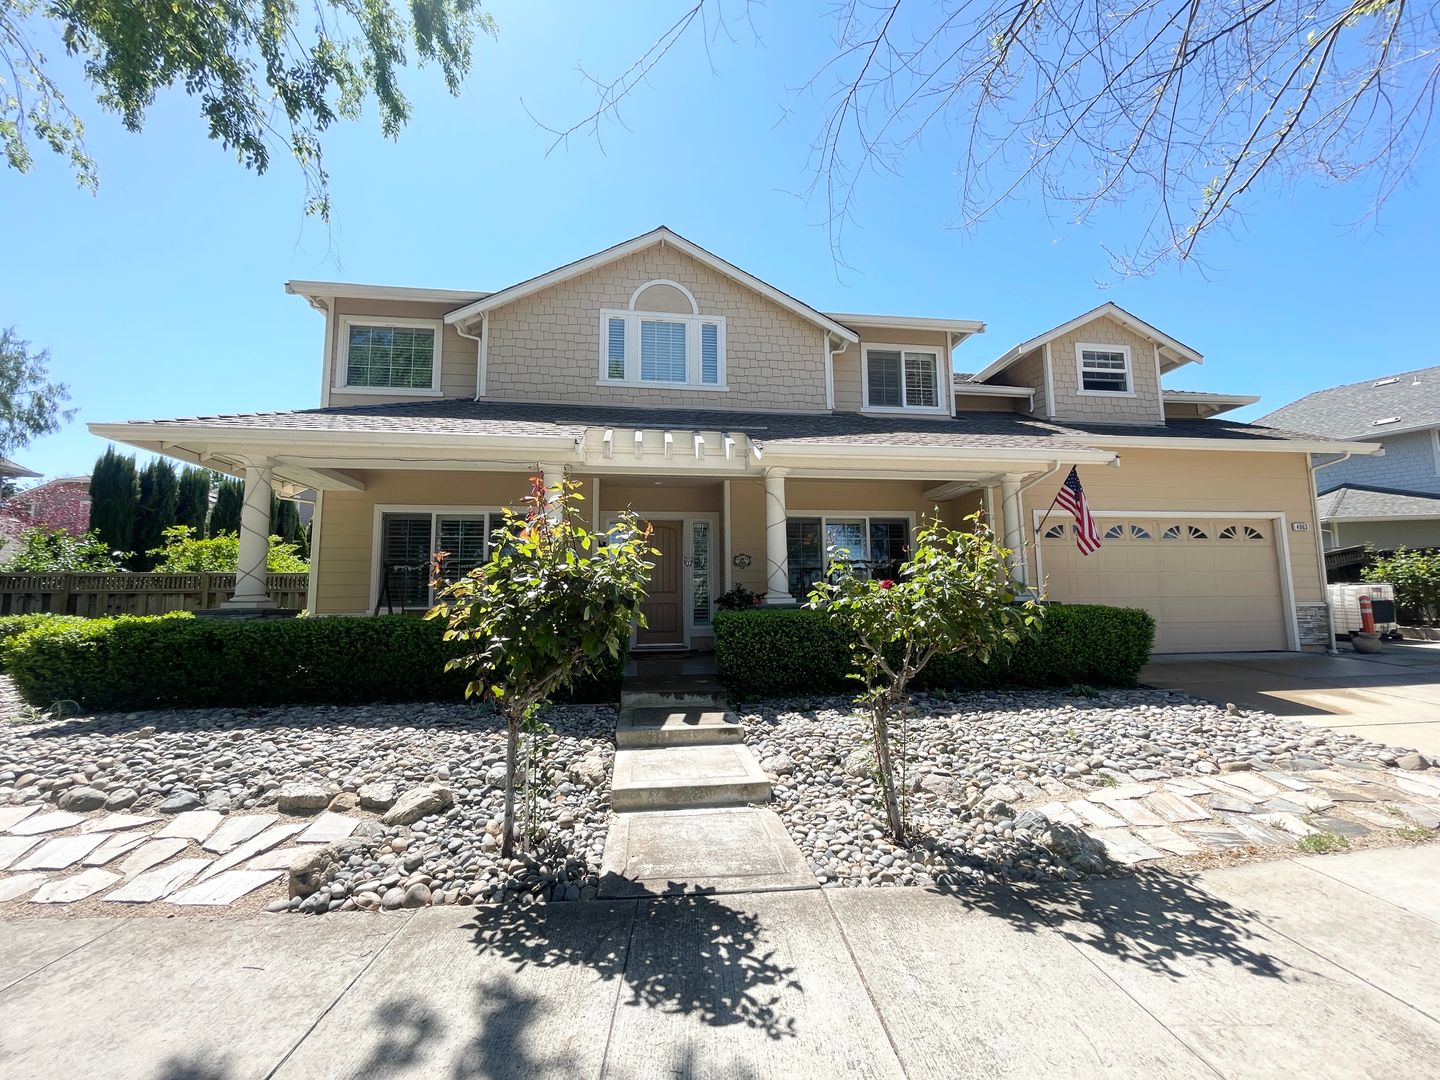 Five Bedroom Home in the Heart of Livermore Wine Country